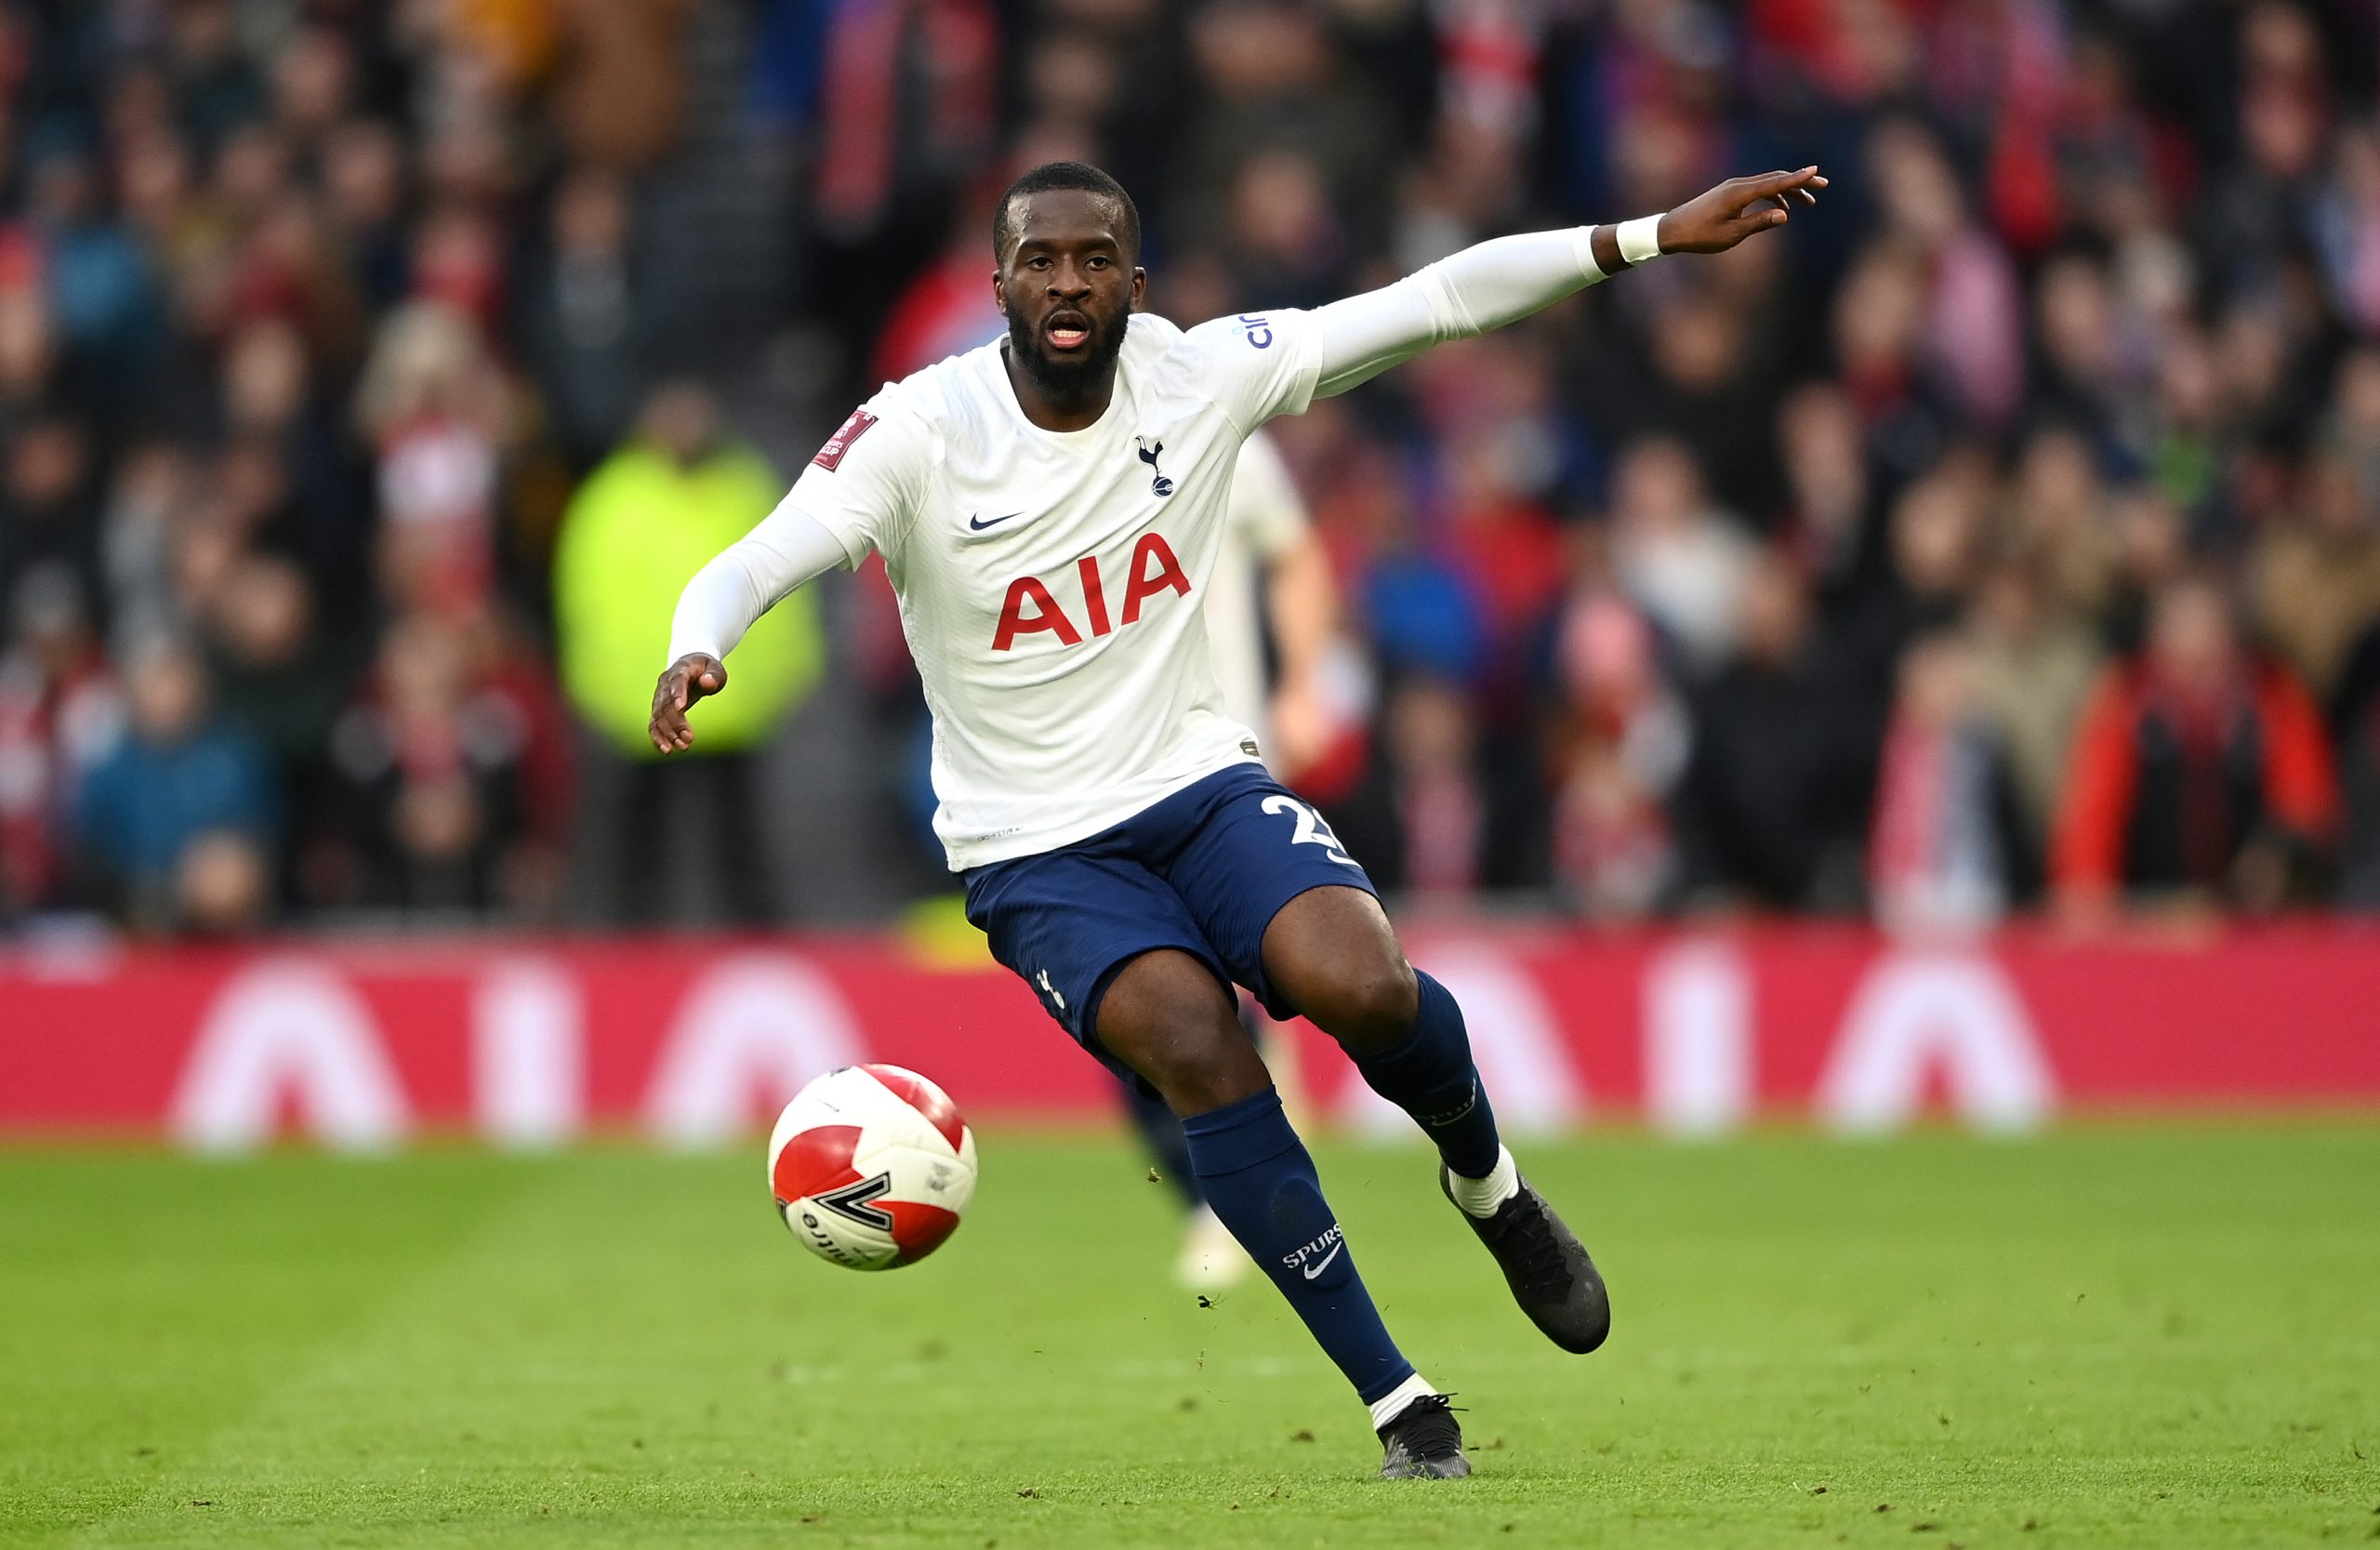 Valencia reach agreement with Tottenham Hotspur for Tanguy Ndombele loan